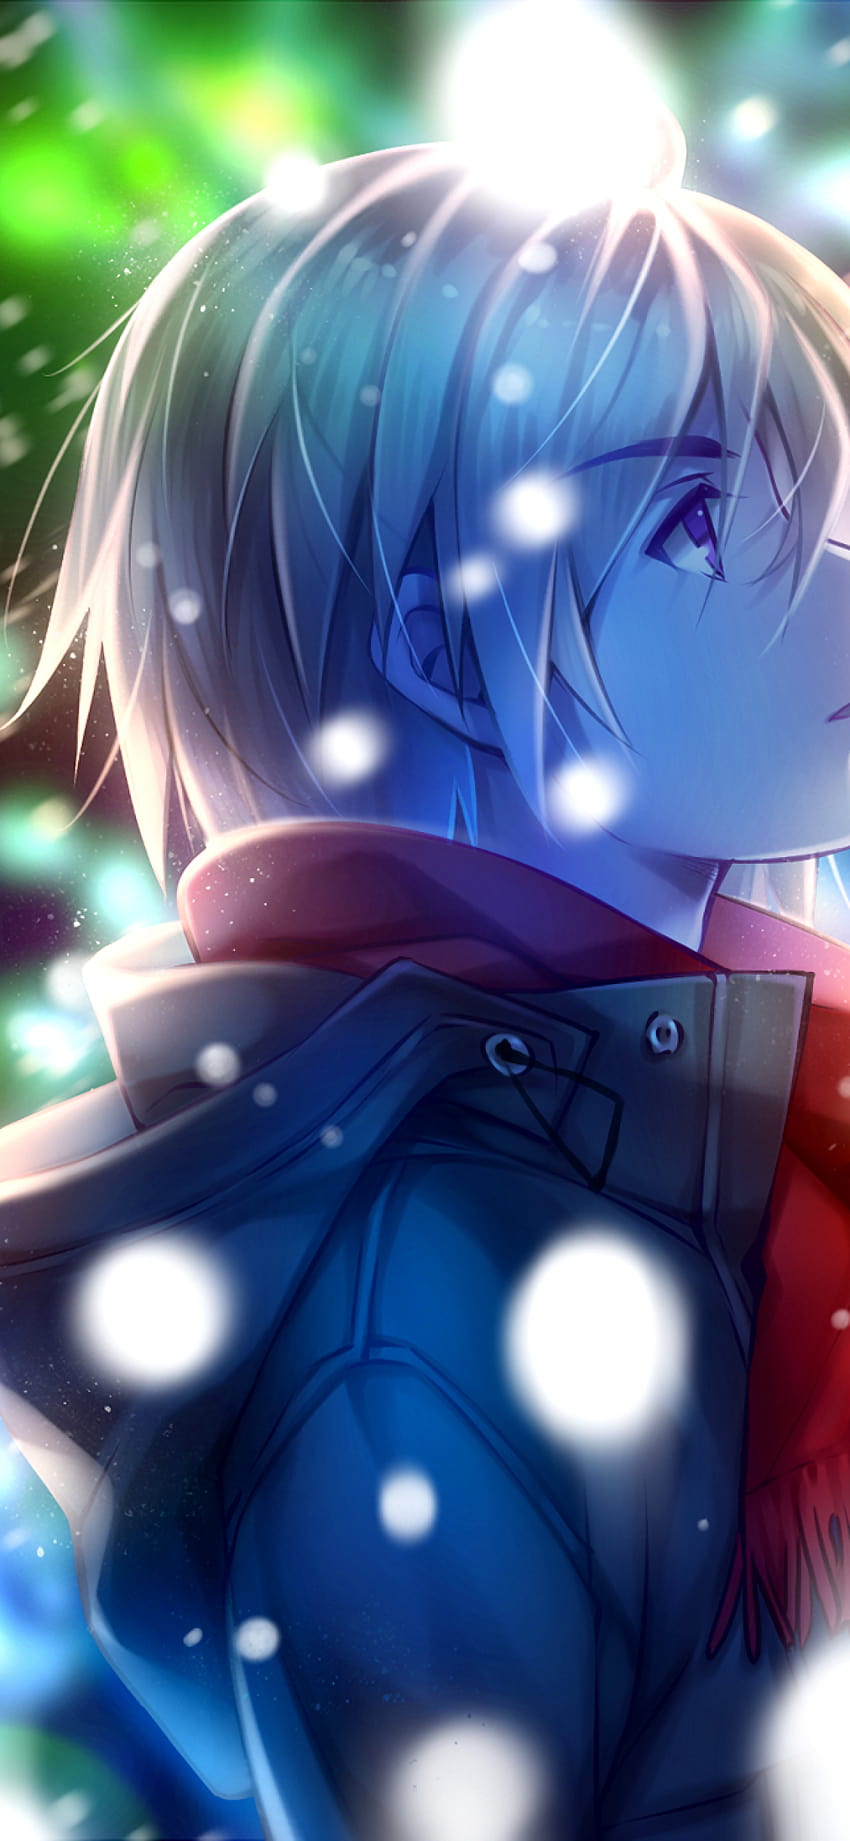 1125x2436 Anime Boy, Profile View, Red Scarf, Winter, Snow, Coffee for iPhone 11 Pro & X, winter boy anime HD phone wallpaper